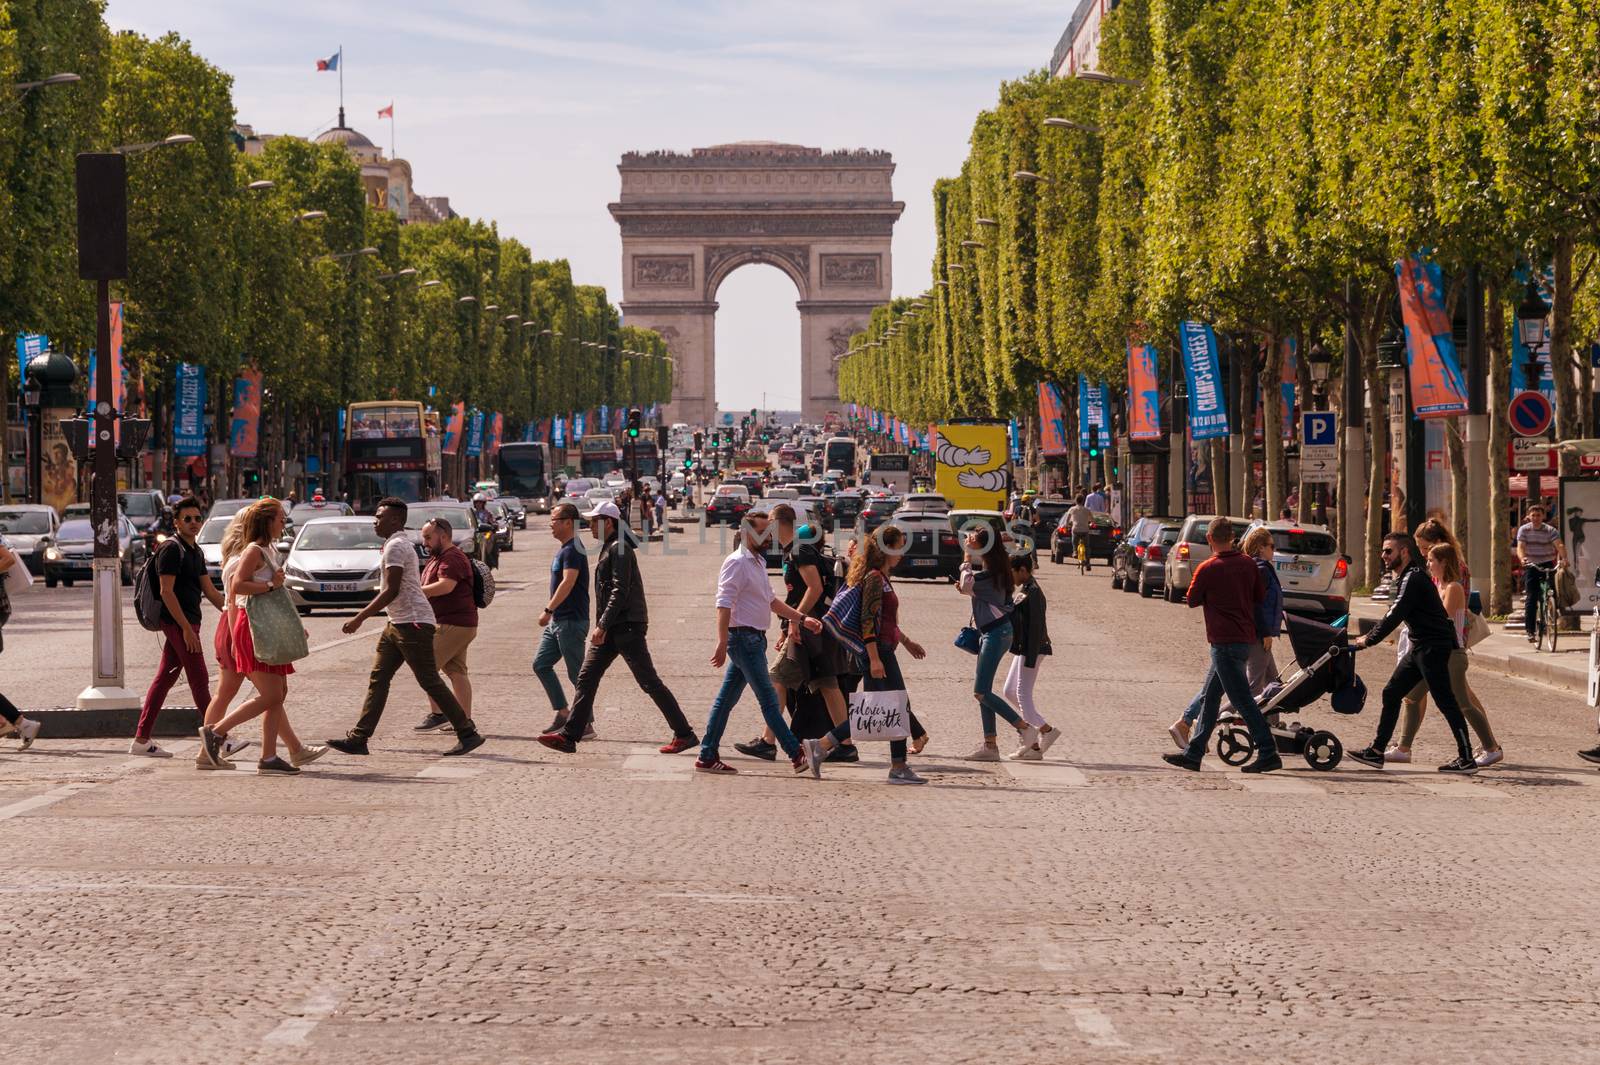 Paris, France - 23 June 2018: A crowd of people crossing Avenue des Champs-Elysees with Arc de Triomphe in the Background